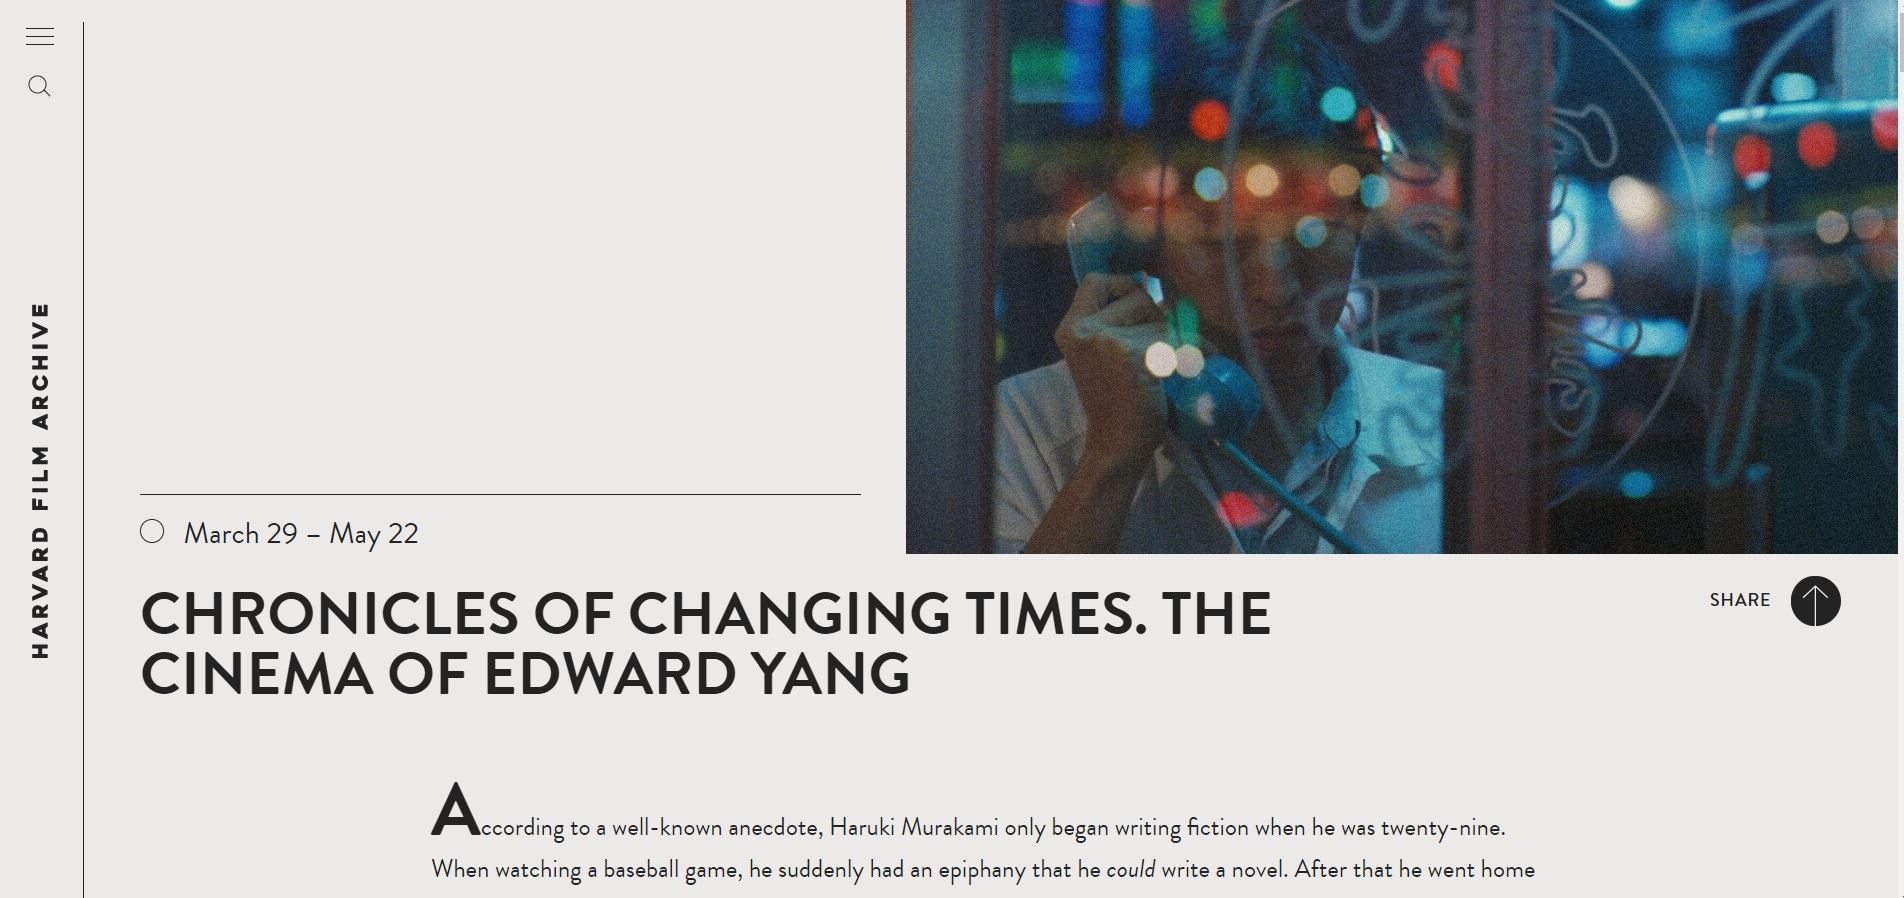 Harvard Film Archive to screen films of Taiwanese director Edward Yang